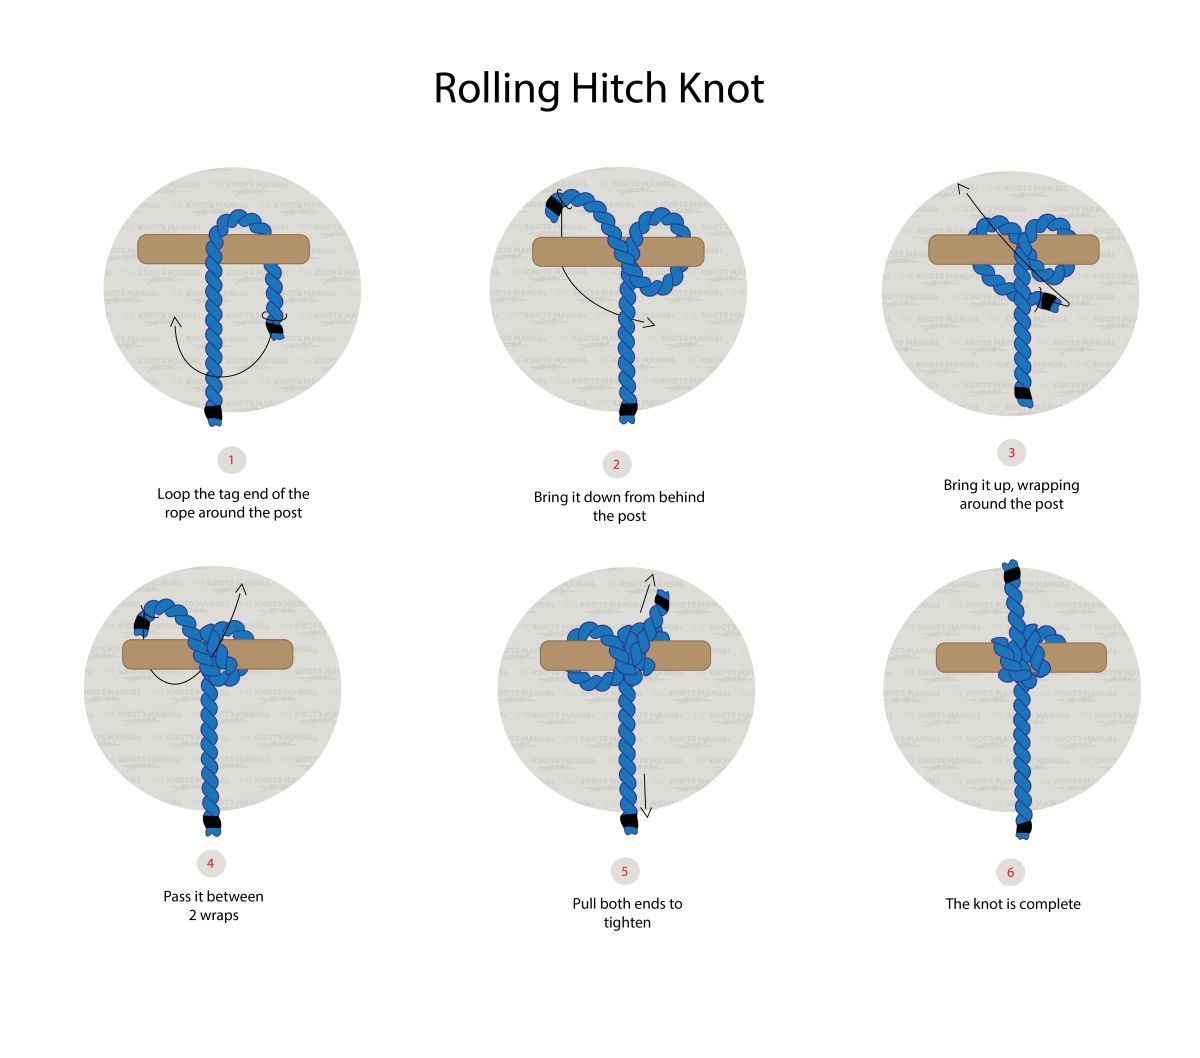 Rolling Hitch Knot or Magnus Knot